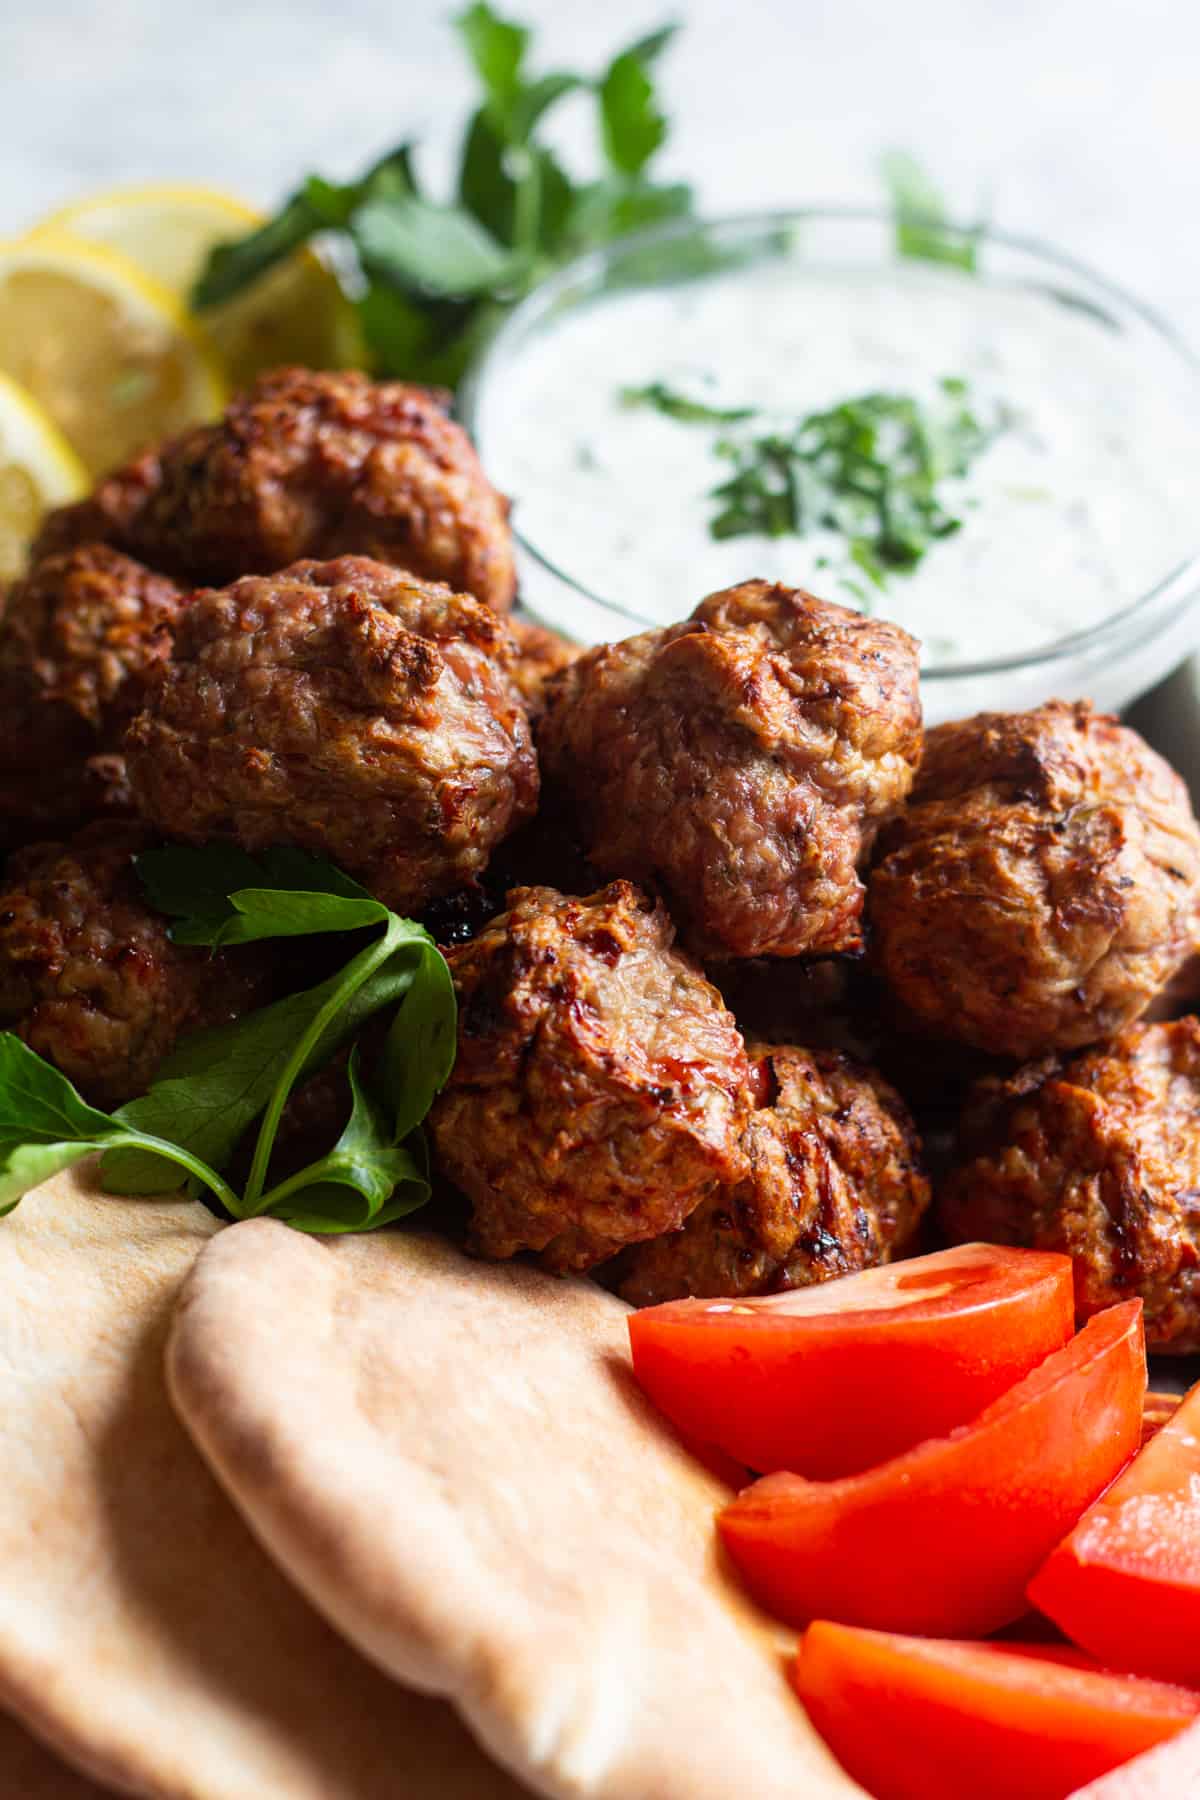 Oven baked turkey meatballs with a Mediterranean twist! These healthy baked meatballs are perfect for a quick dinner or meal prepping and are ready in no time! You can serve them with rice or pita bread, tomatoes, cucumbers and tzatziki! Simple yet so delicious! 